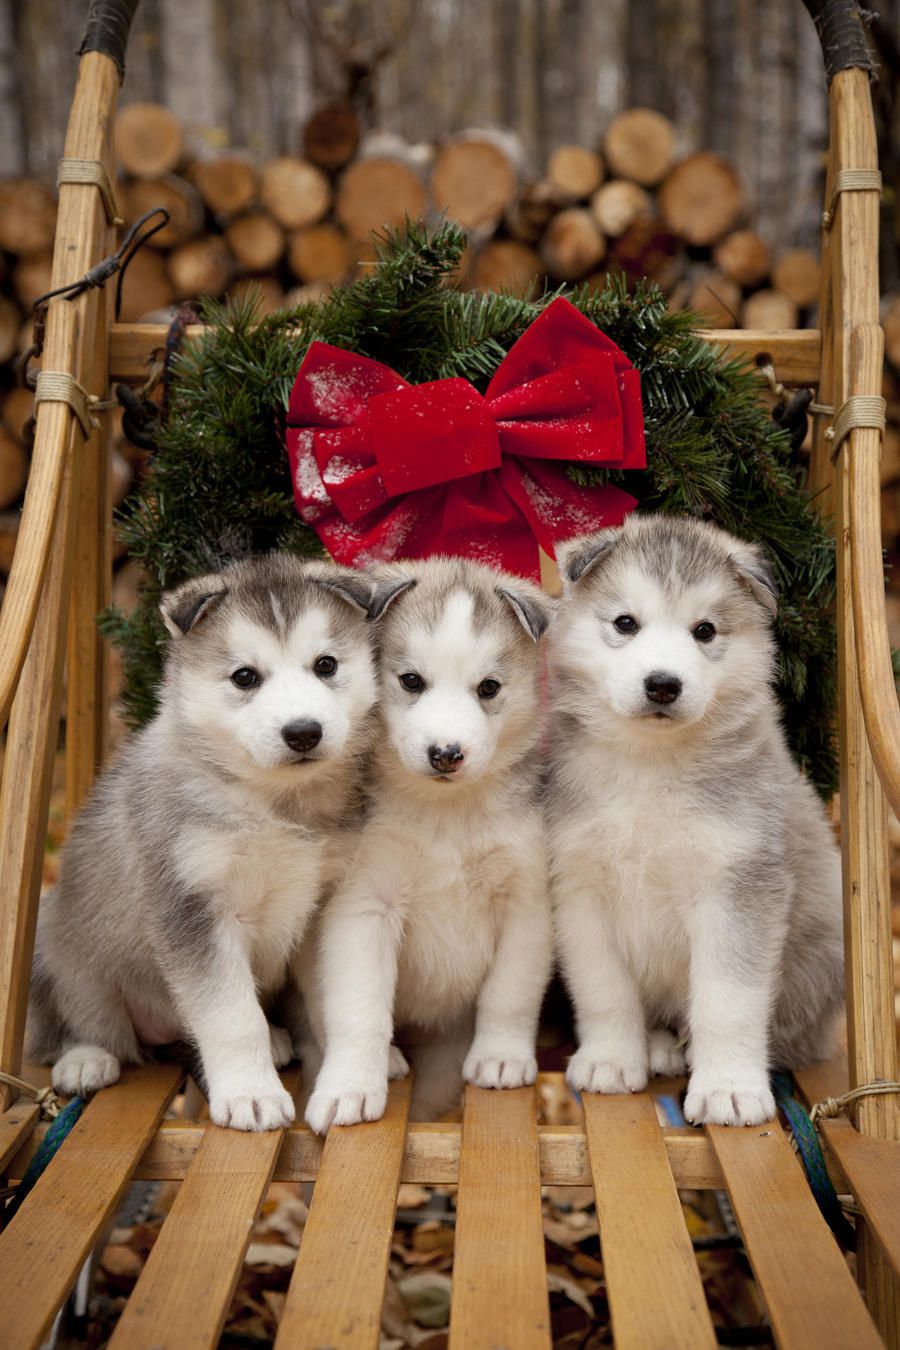 Siberian Husky Puppies In Traditional Wooden Dog Sled With Christmas Wreath, Alaska